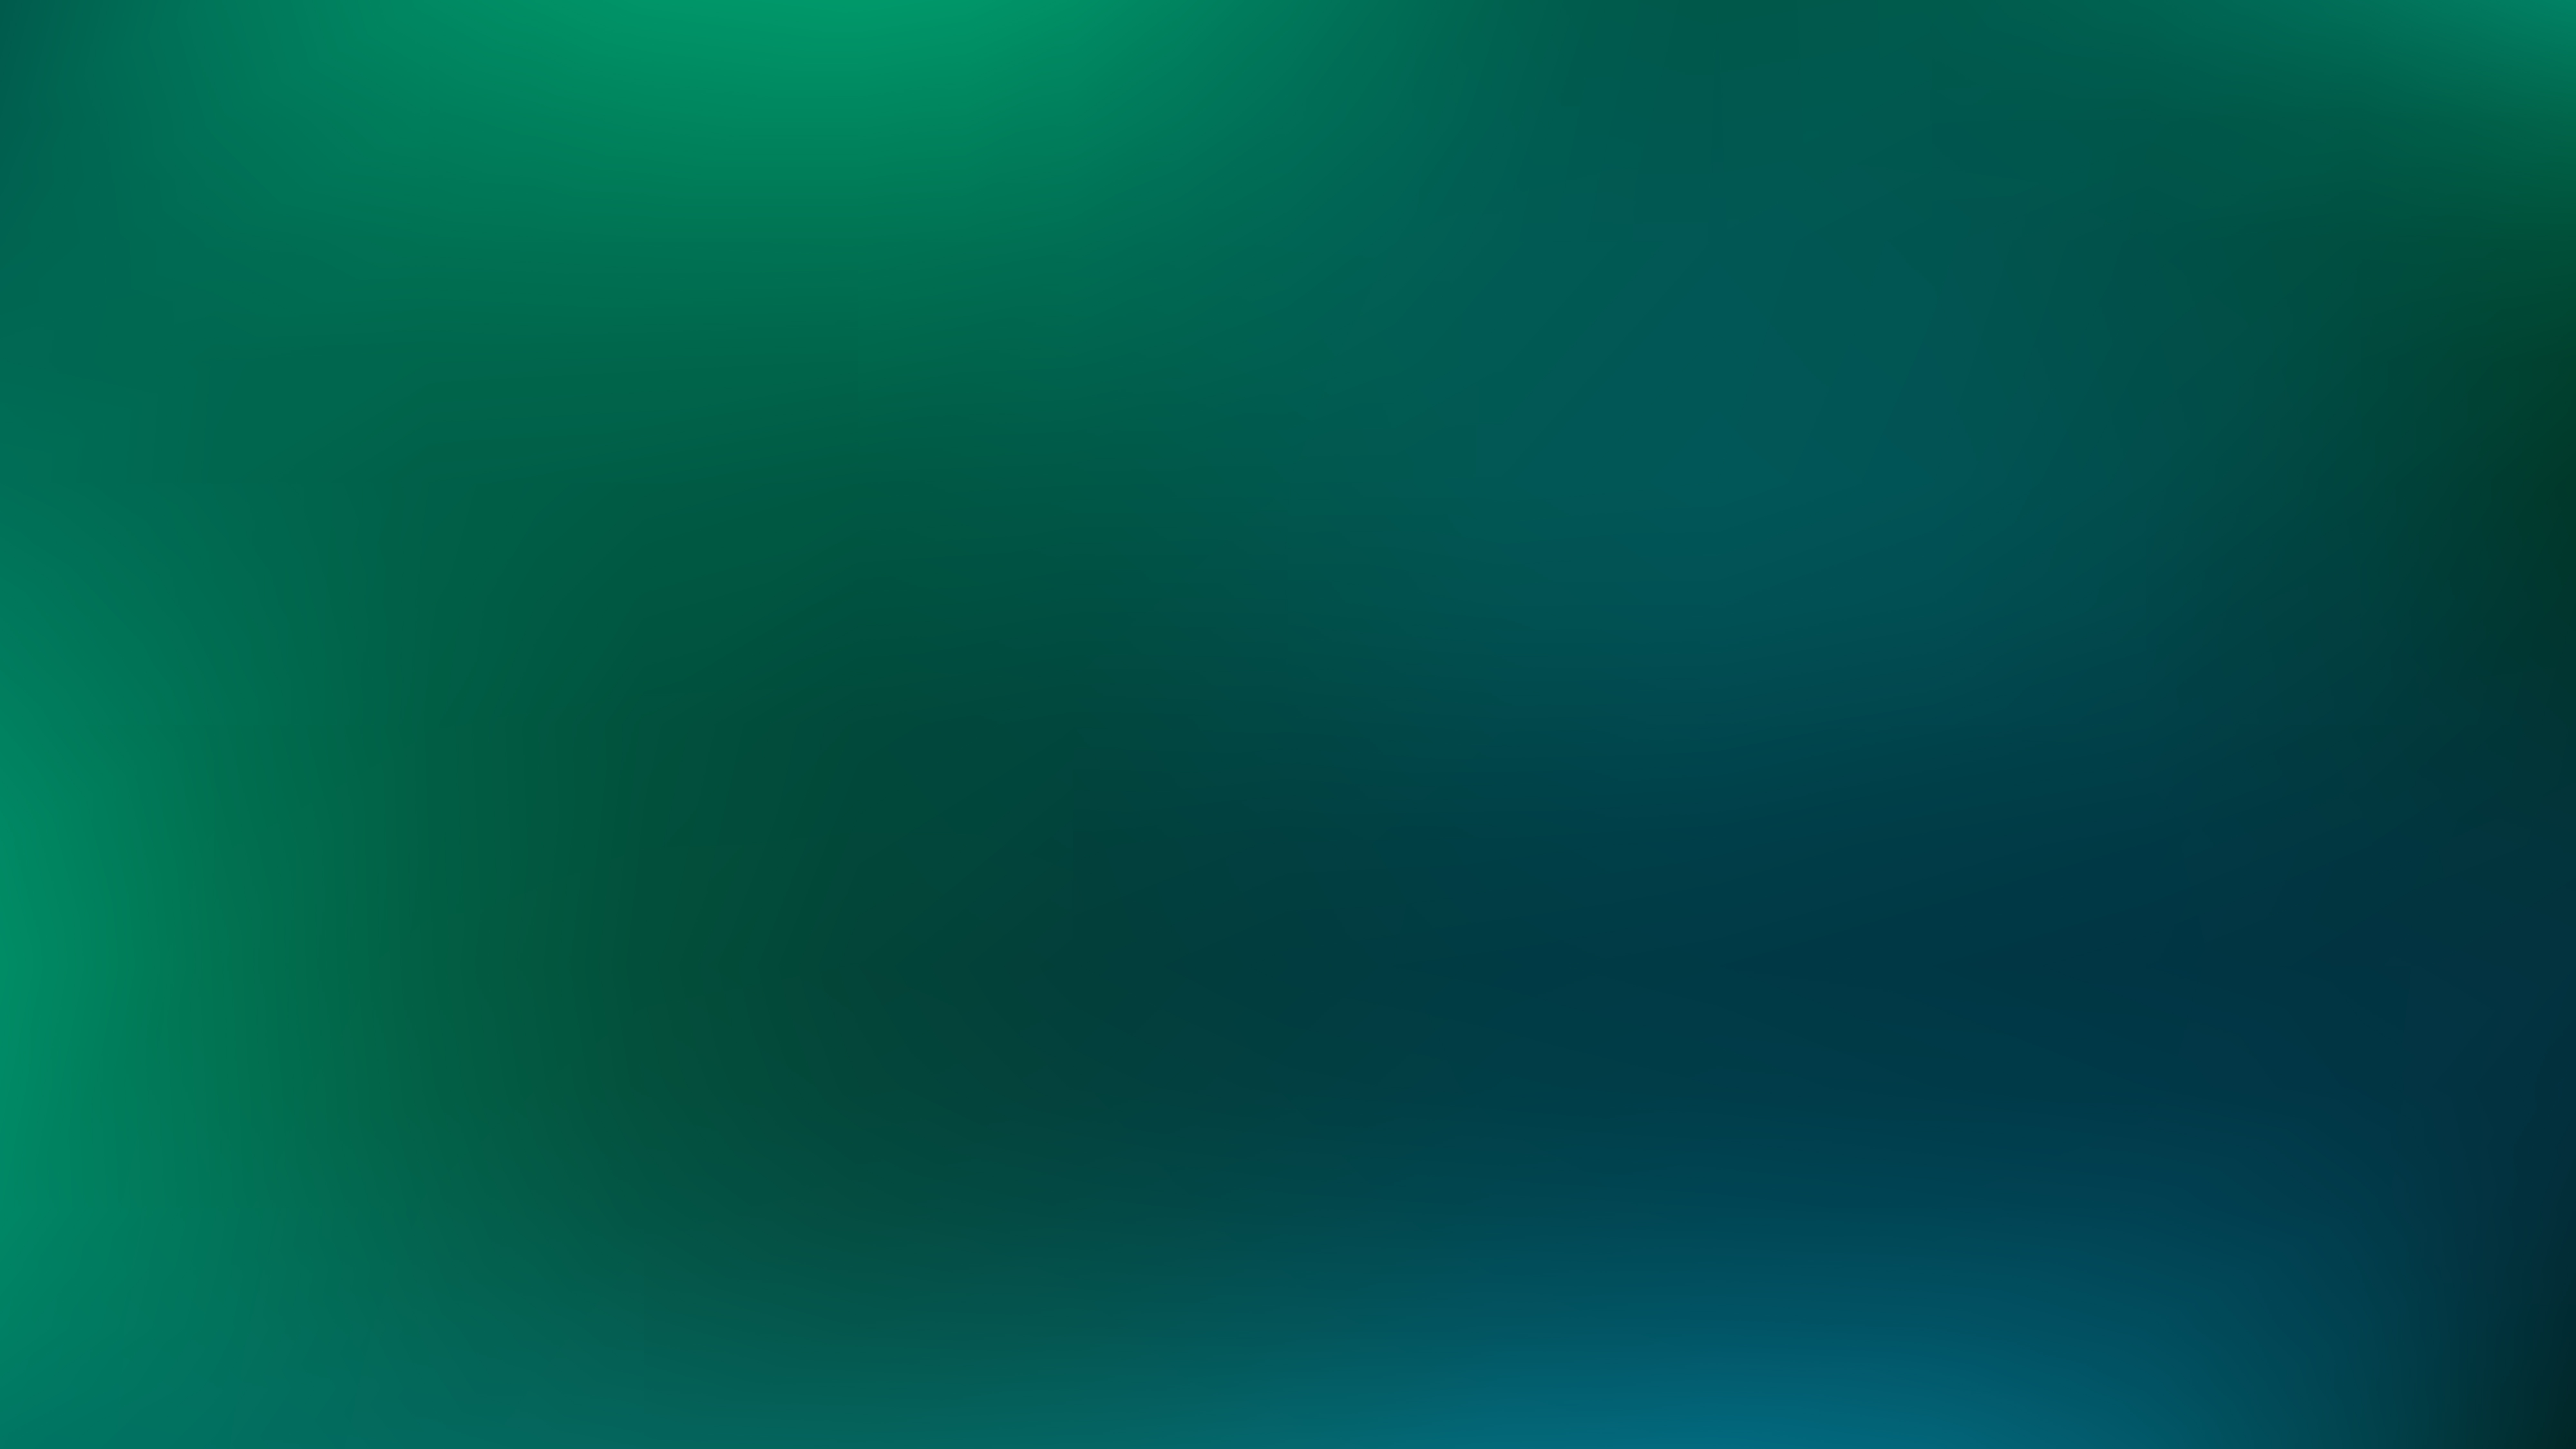 Free Blue and Green Professional Background